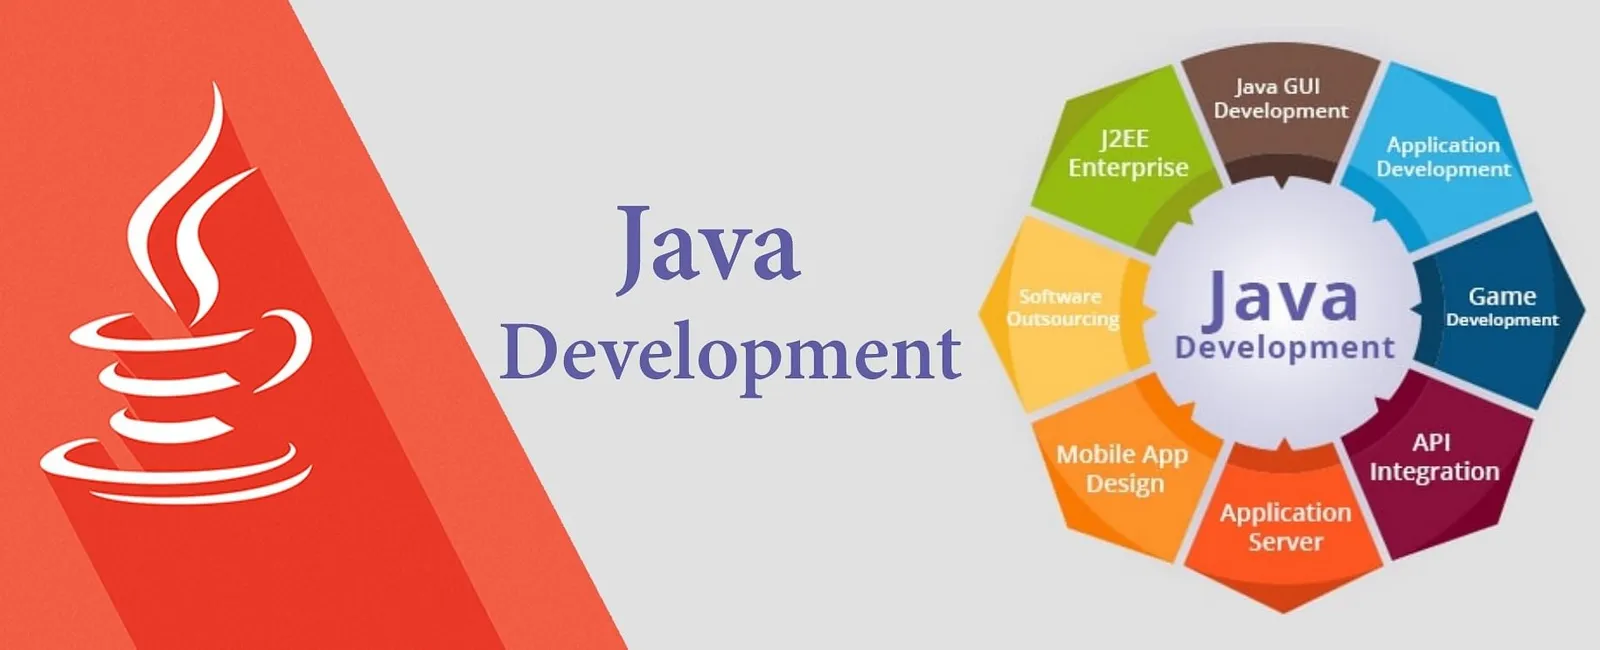 How to Develop Mobile Applications with Java?